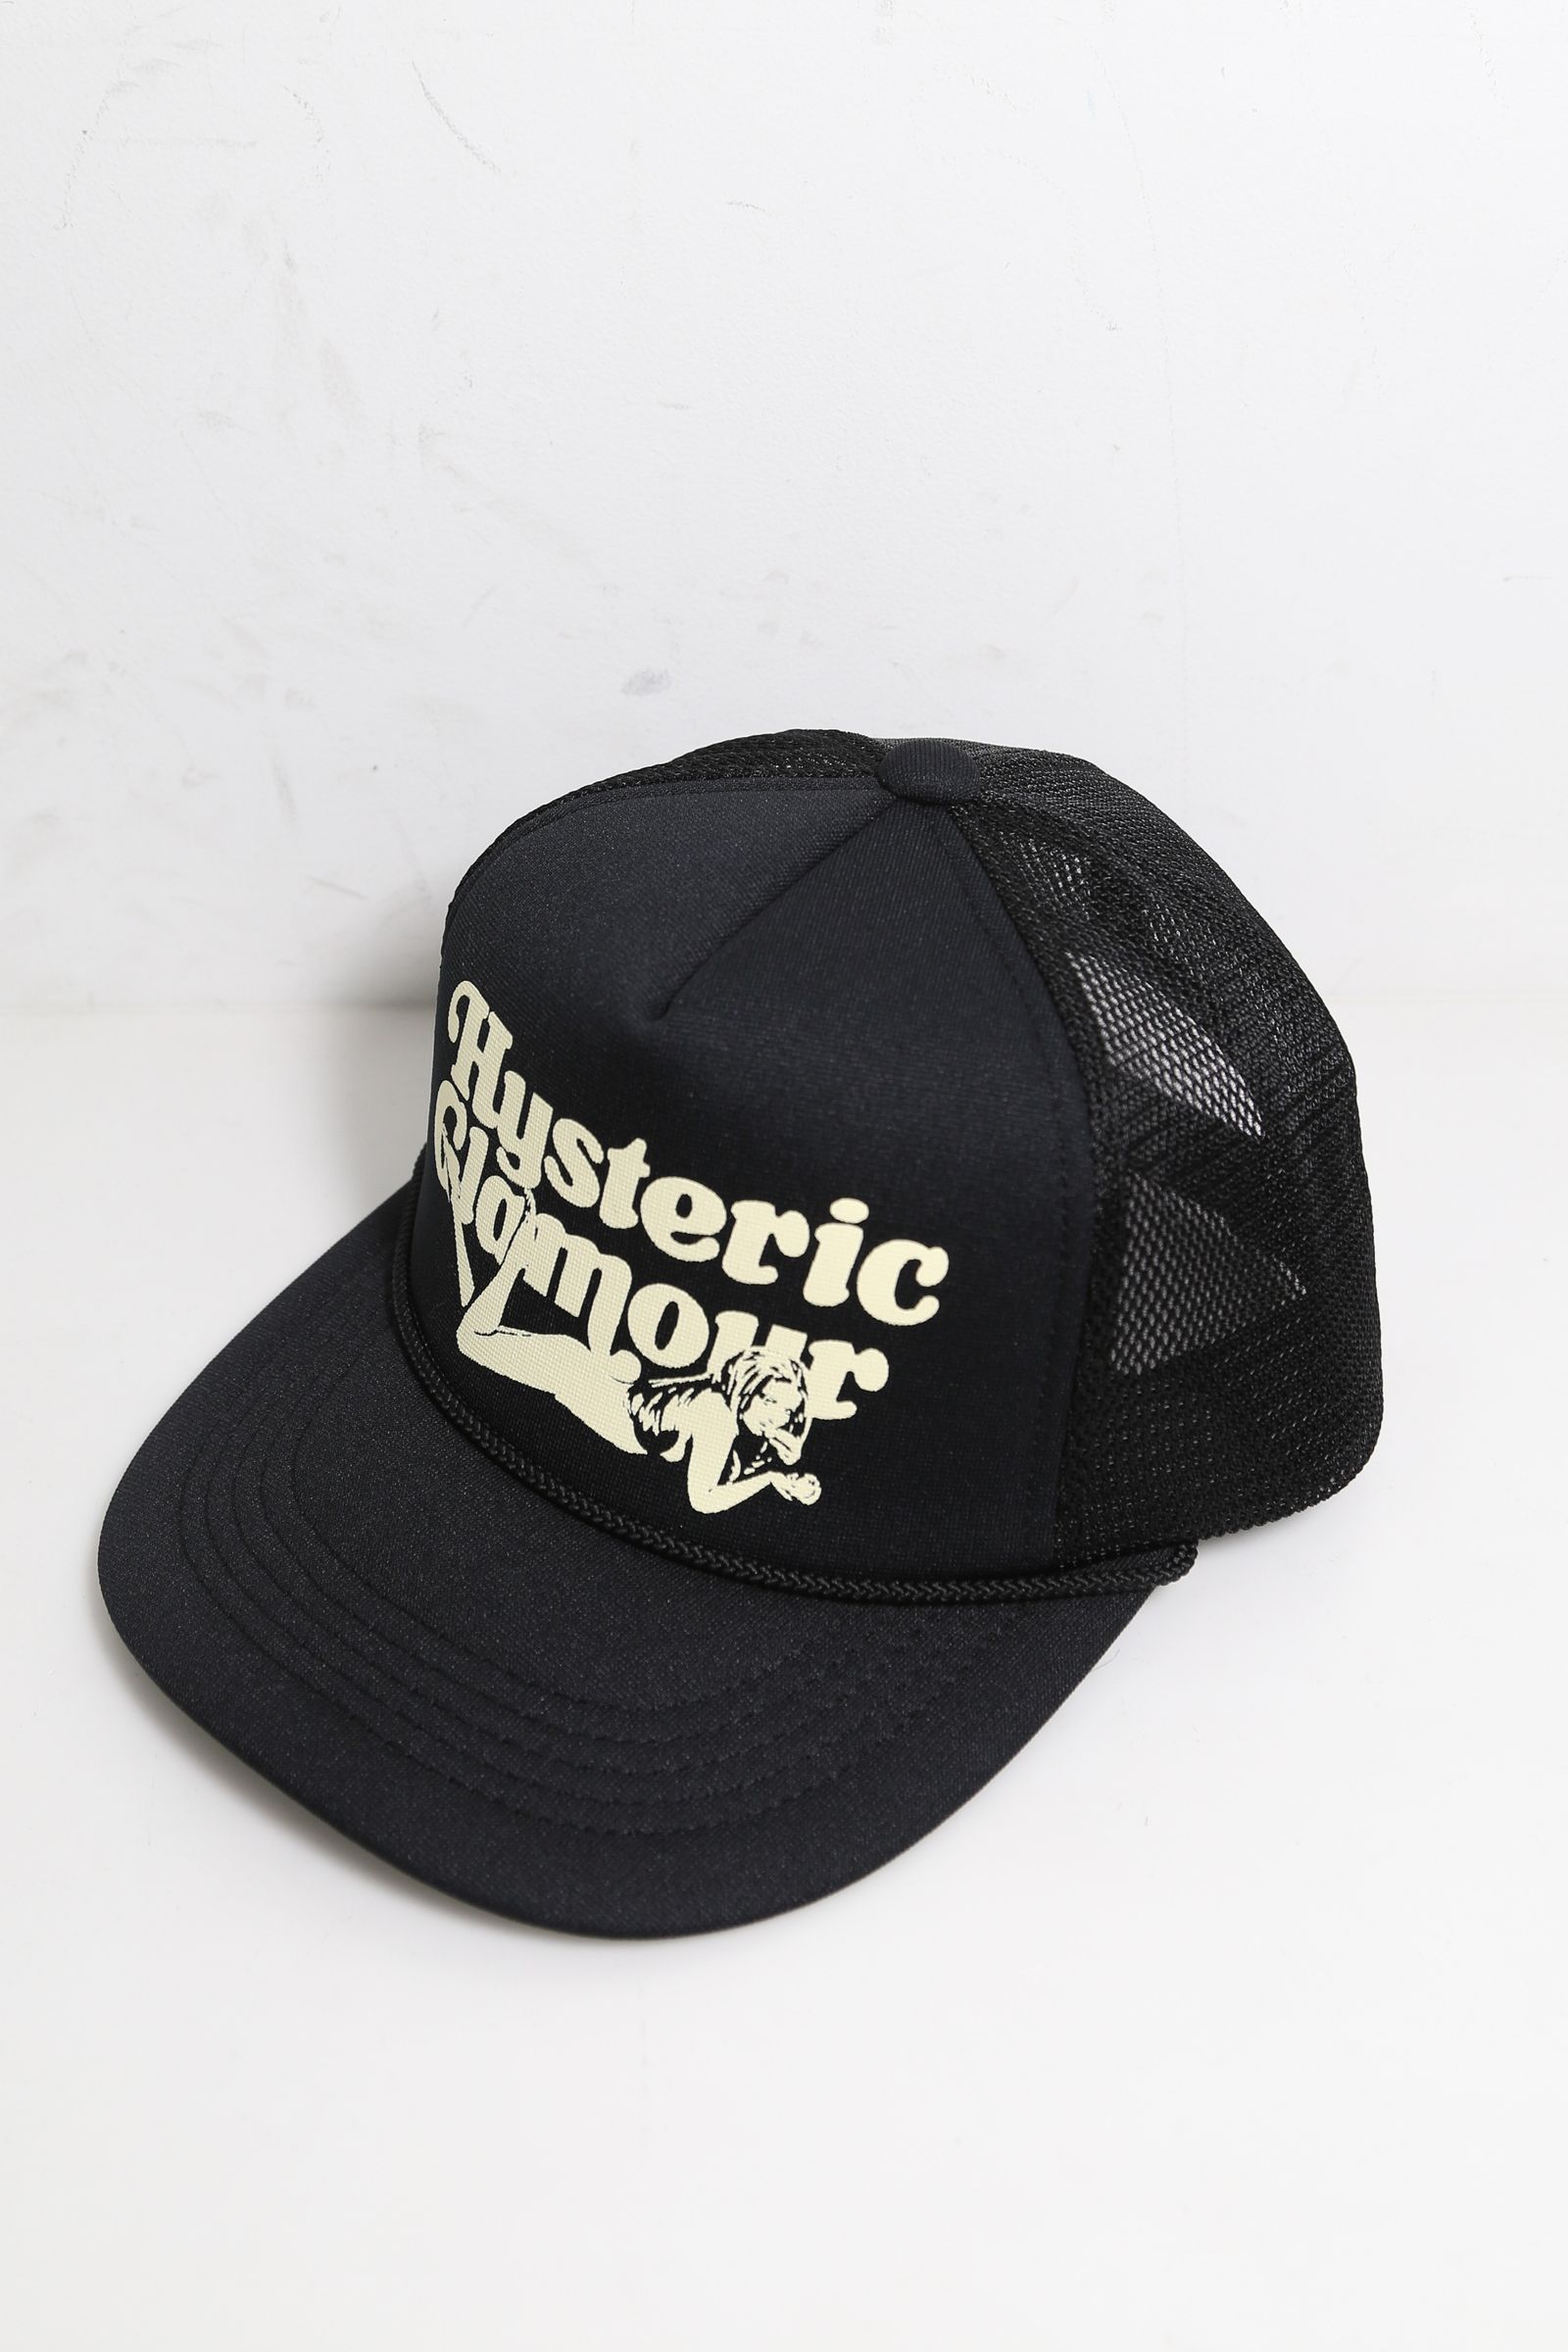 HYSTERIC GLAMOUR - LIE DOWN GIRL メッシュキャップ